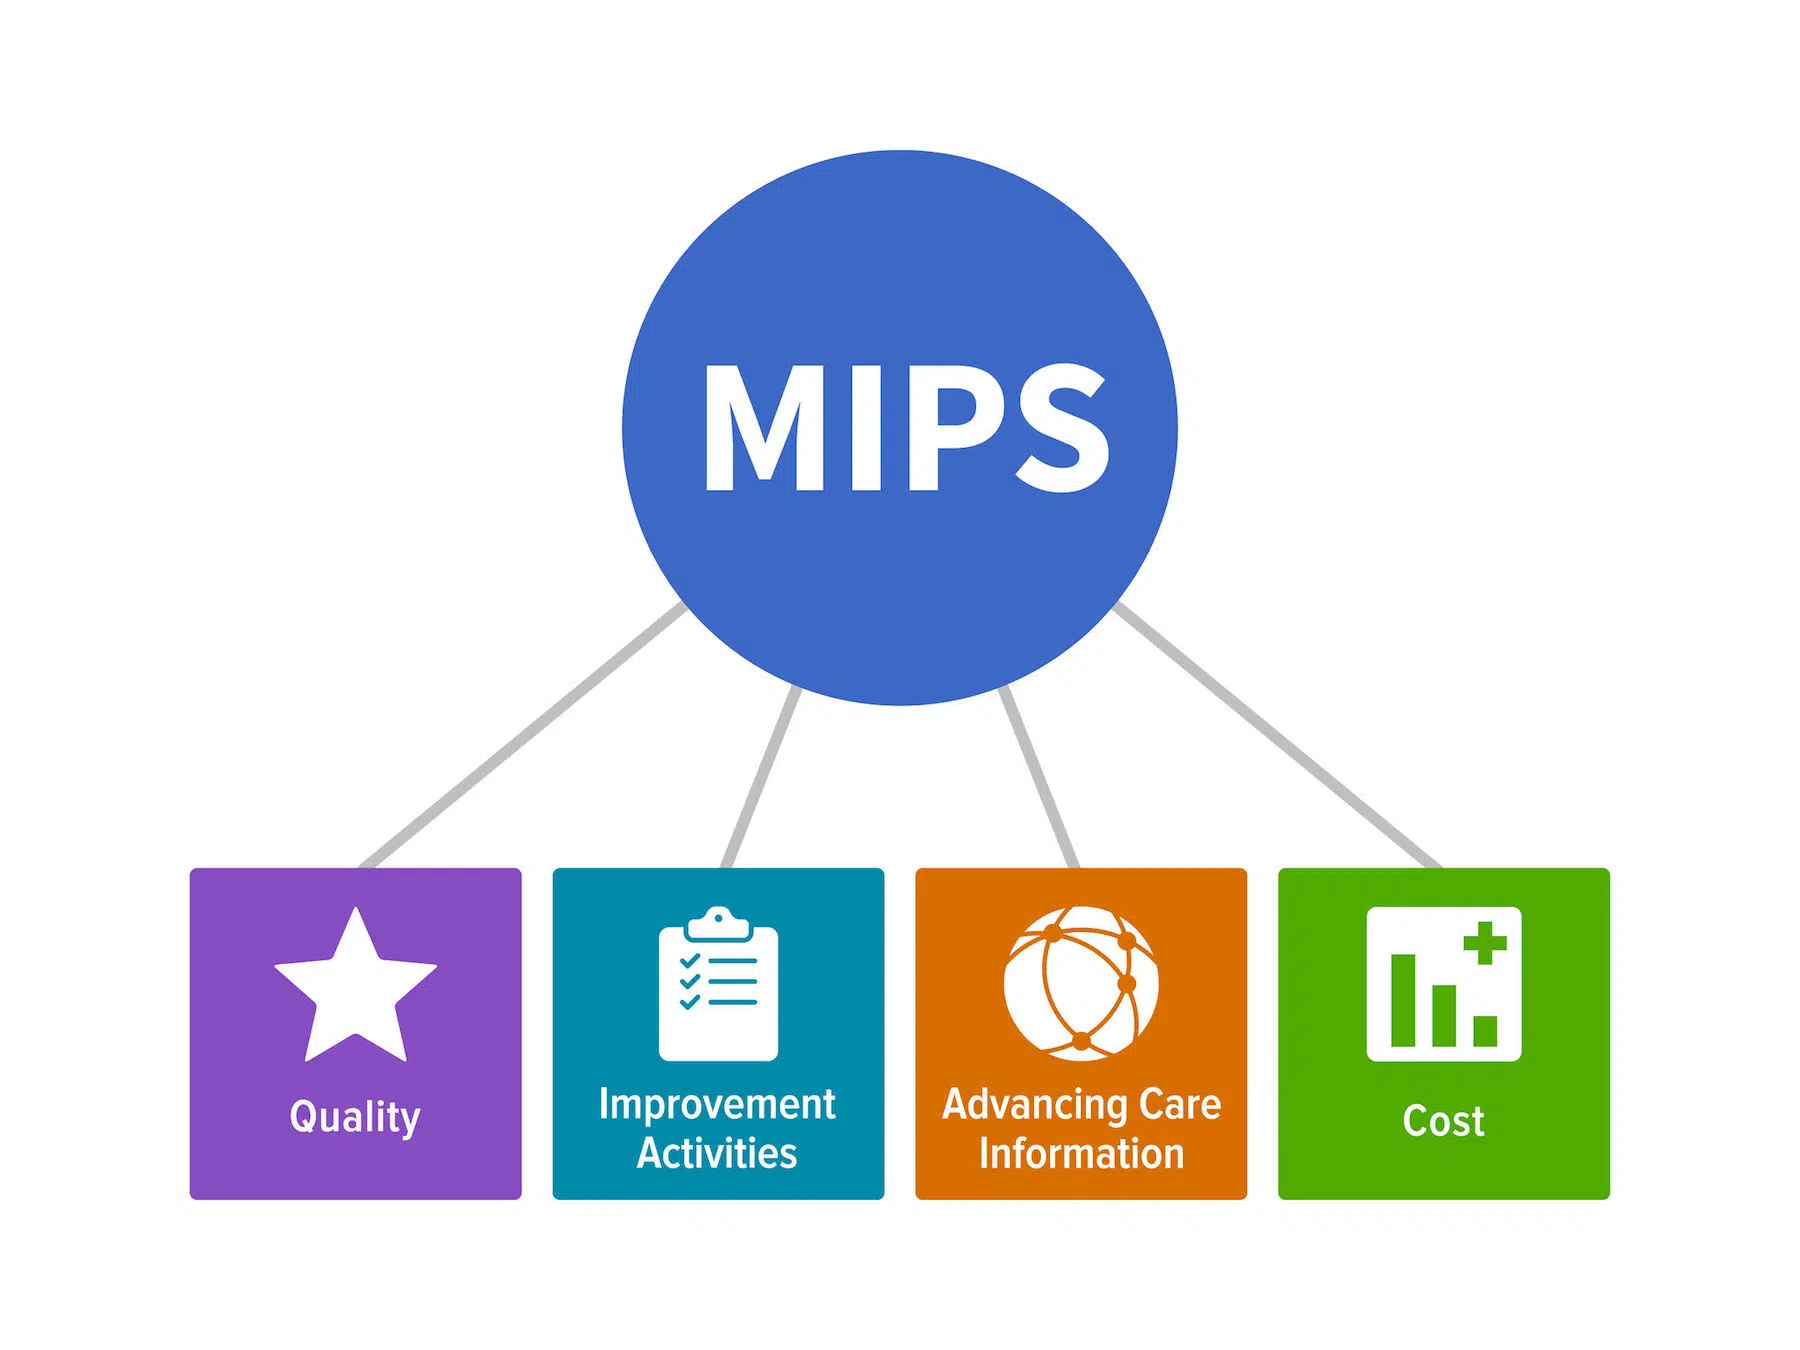 MIPs - merit-based incentive payment system 